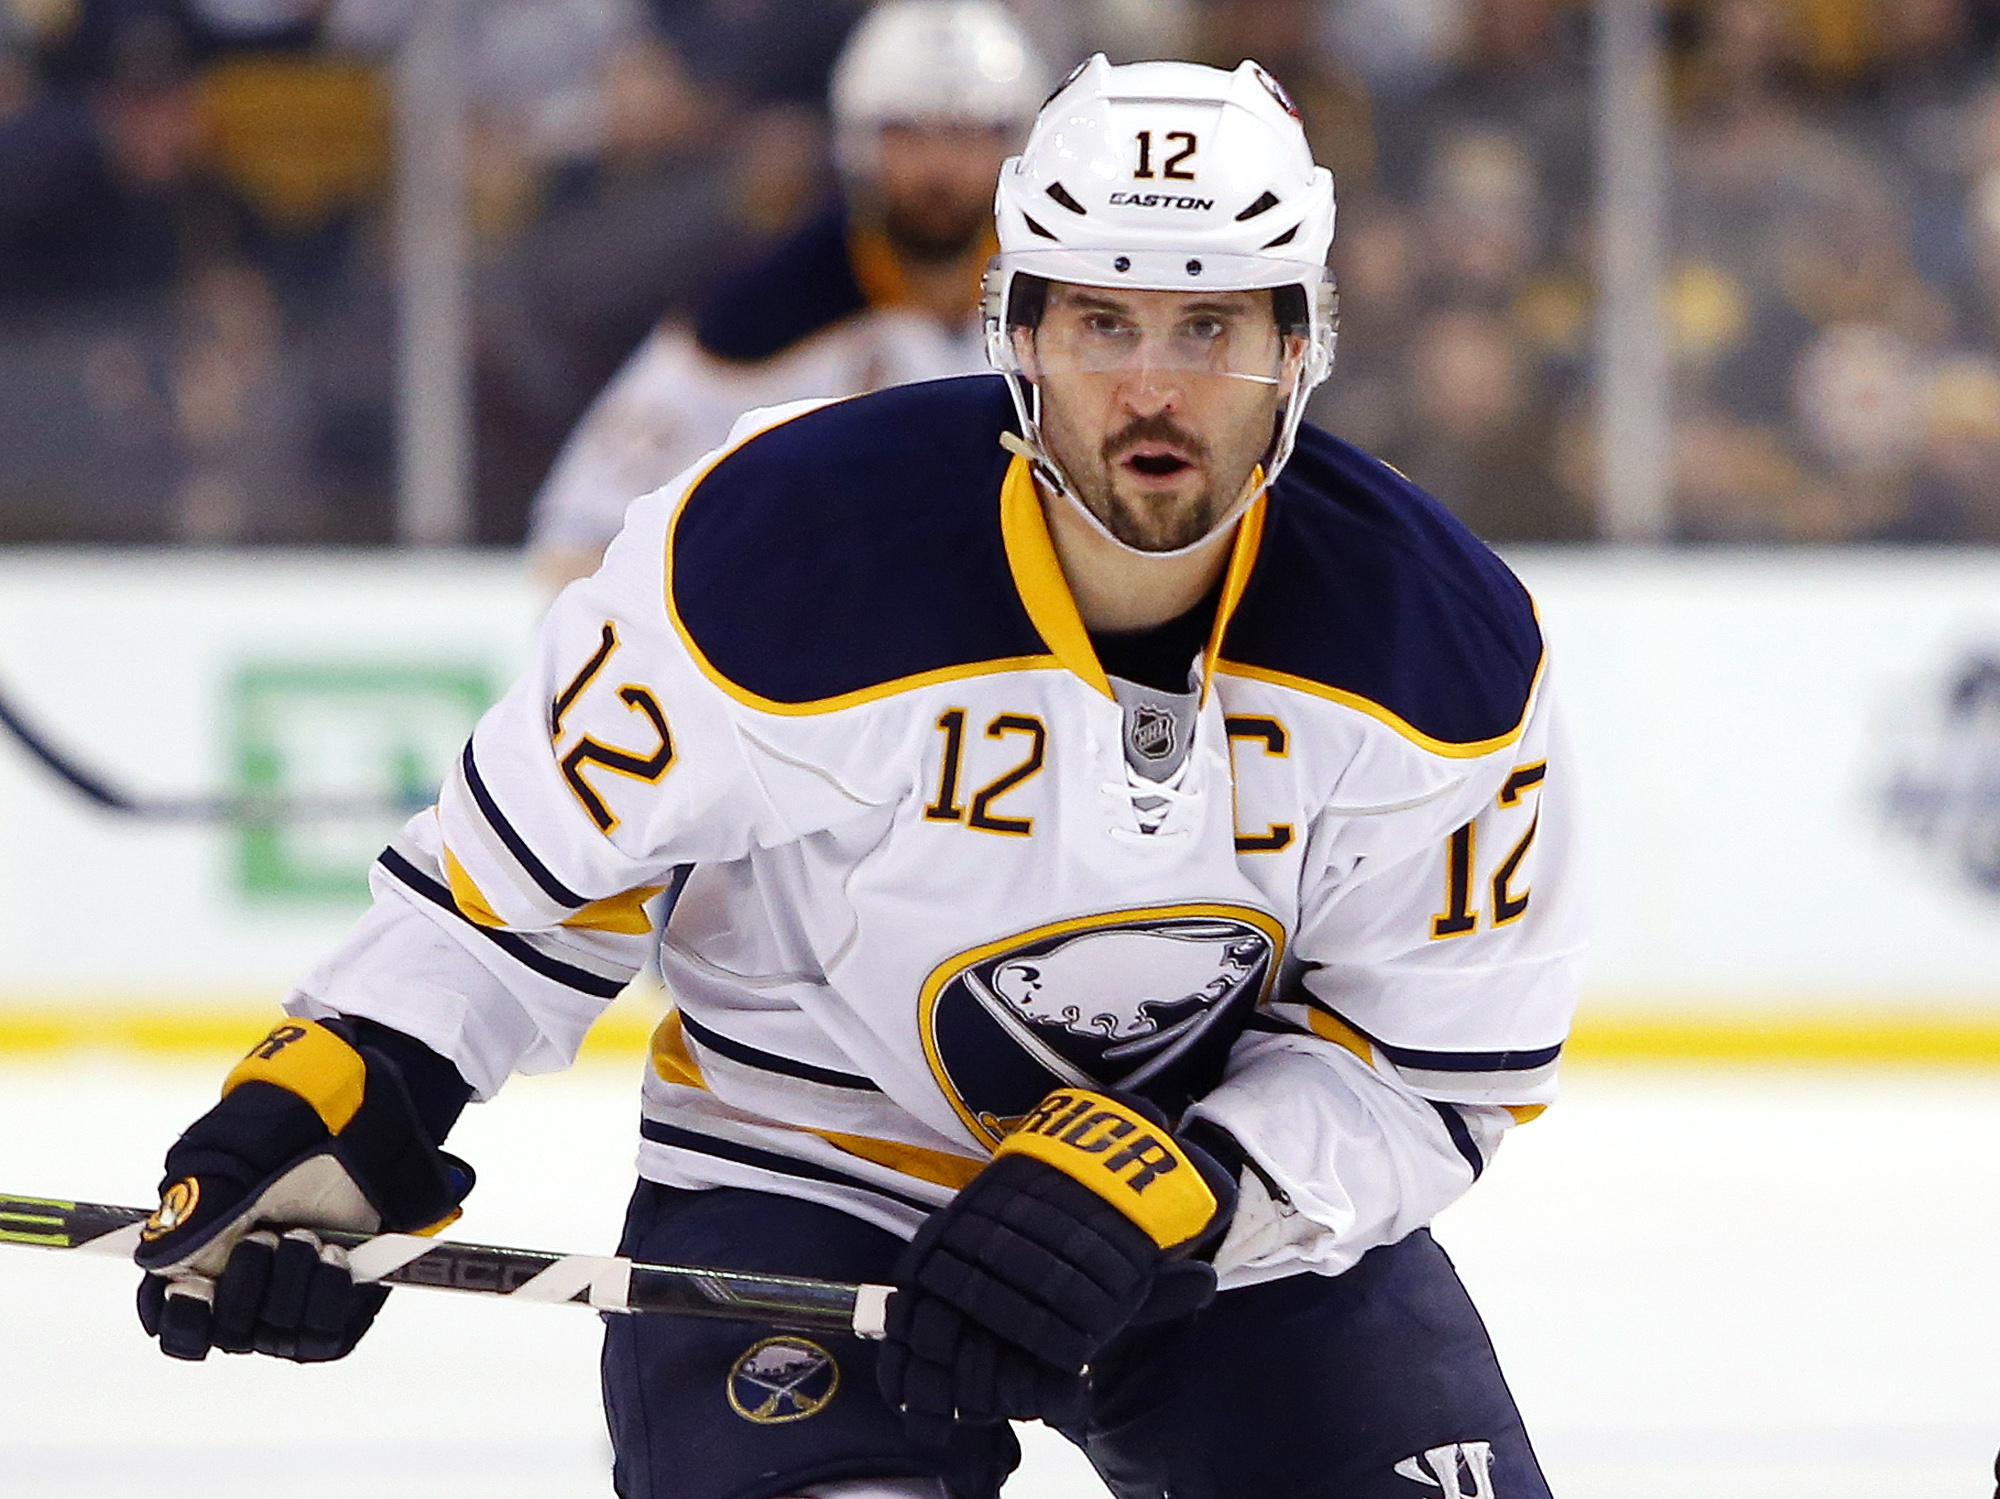 AP source: Brian Gionta set to retire after 16 NHL seasons